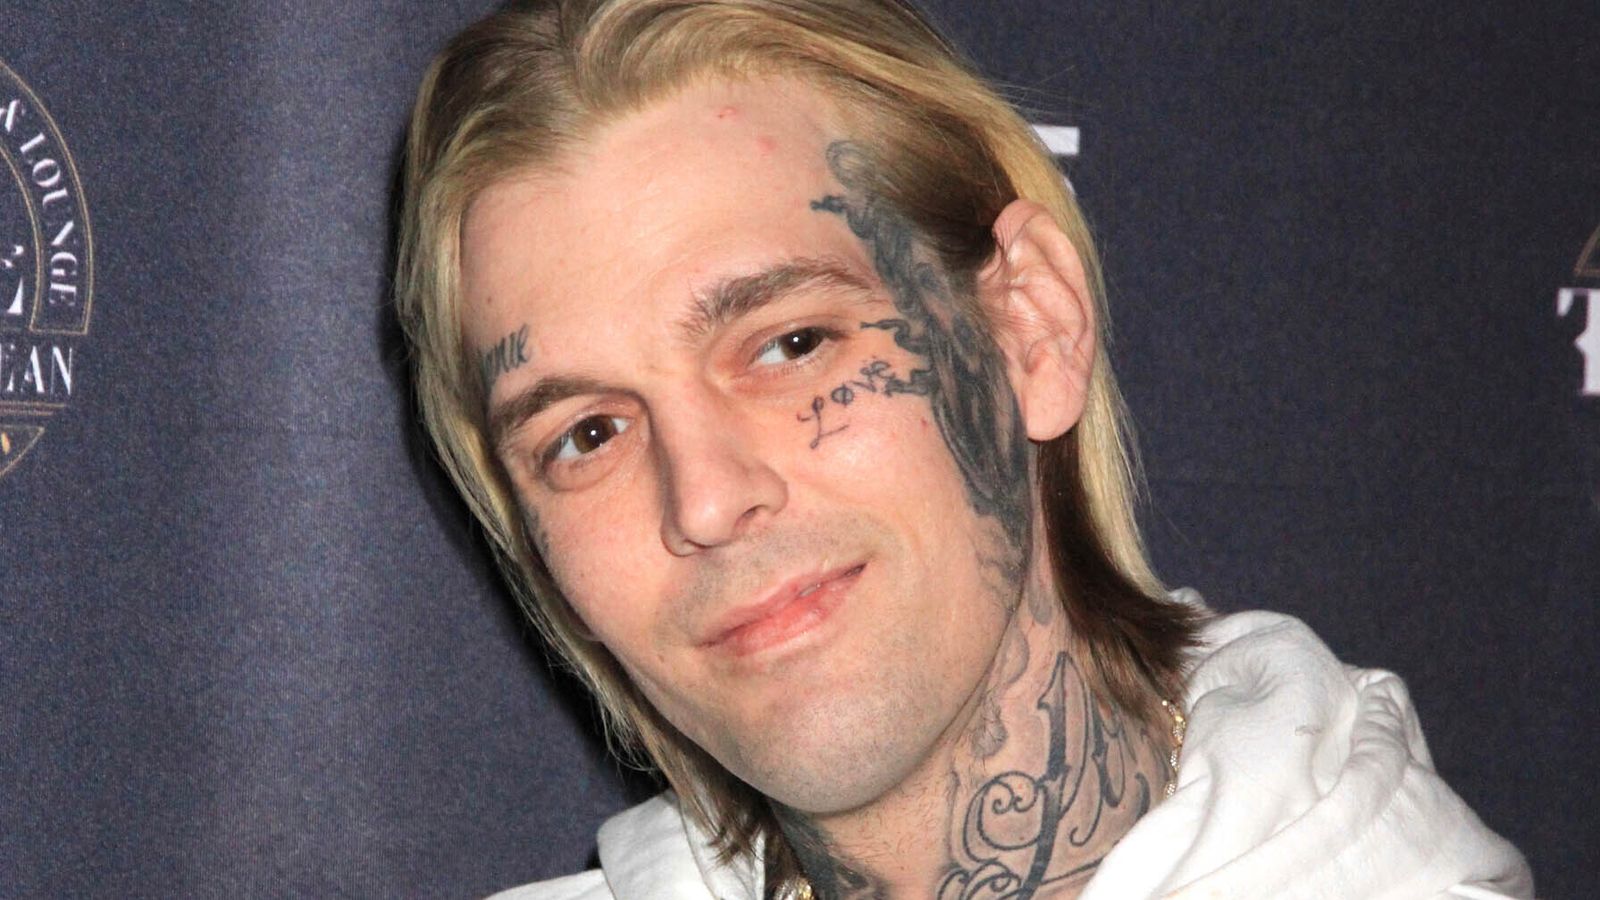 Aaron Carter drowned in his bathtub after 'inhaling compressed gas' and taking sedatives, autopsy report says